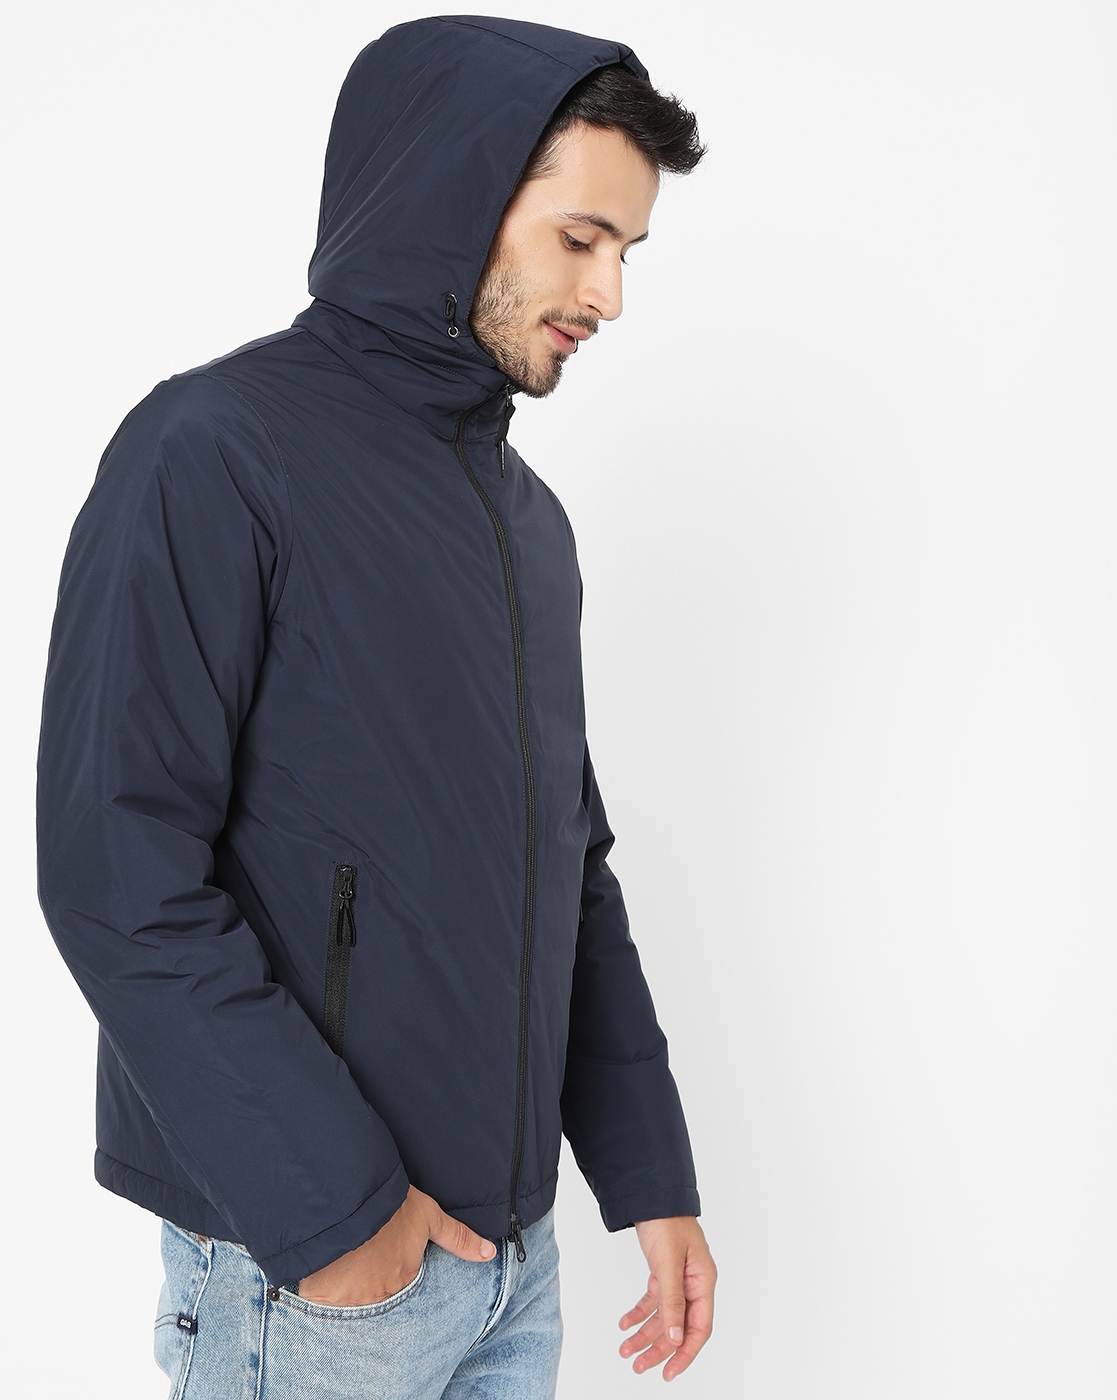 GAS | Fay Hooded Jacket with Zipper Pockets